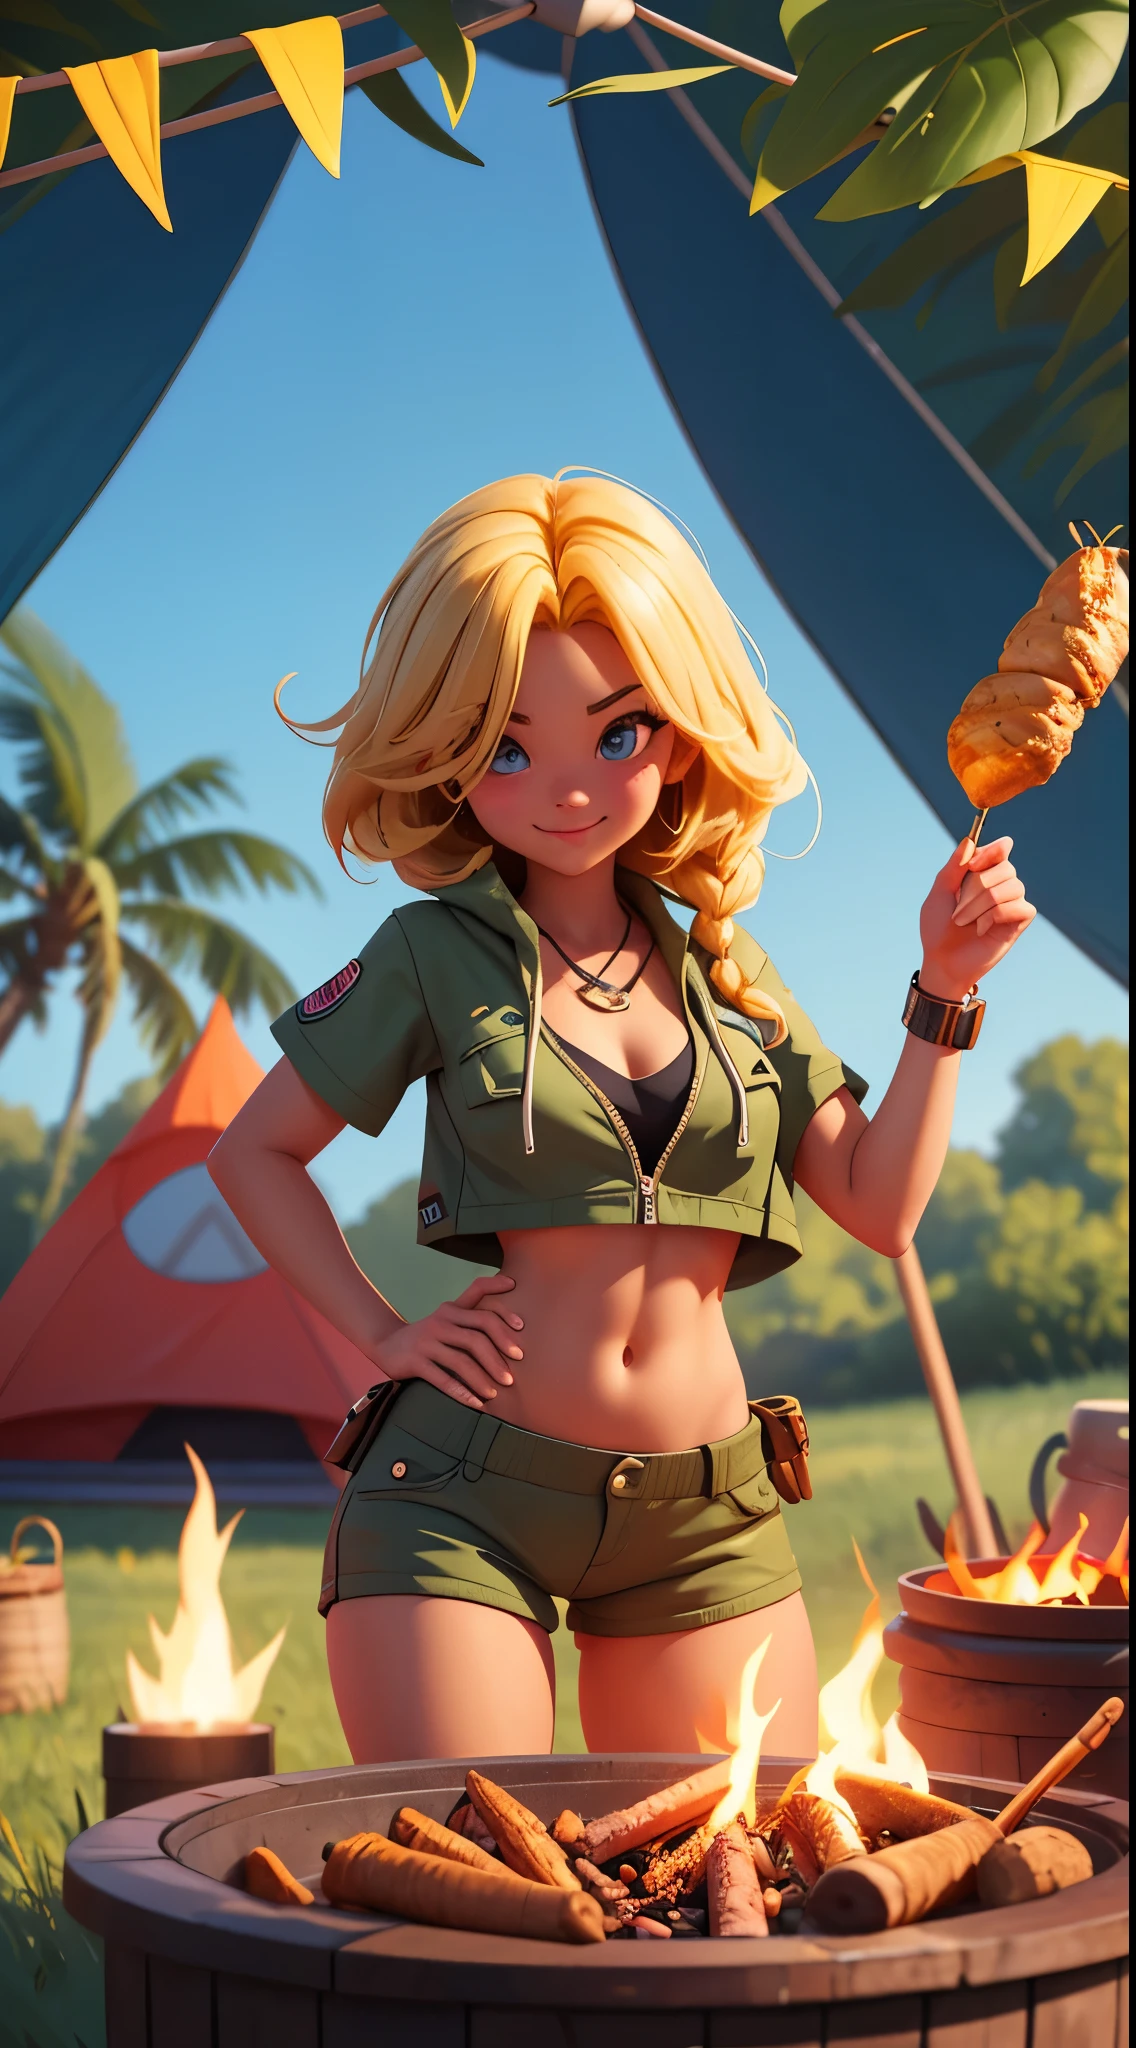 on a，full bodyesbian, confront, looking at viewert, Blonde hair,(Happy emoji)， Adventure clothing，Voluptious body, Ripe body,perfect  eyes, Tent in the background ，bonfires，Rotisserie